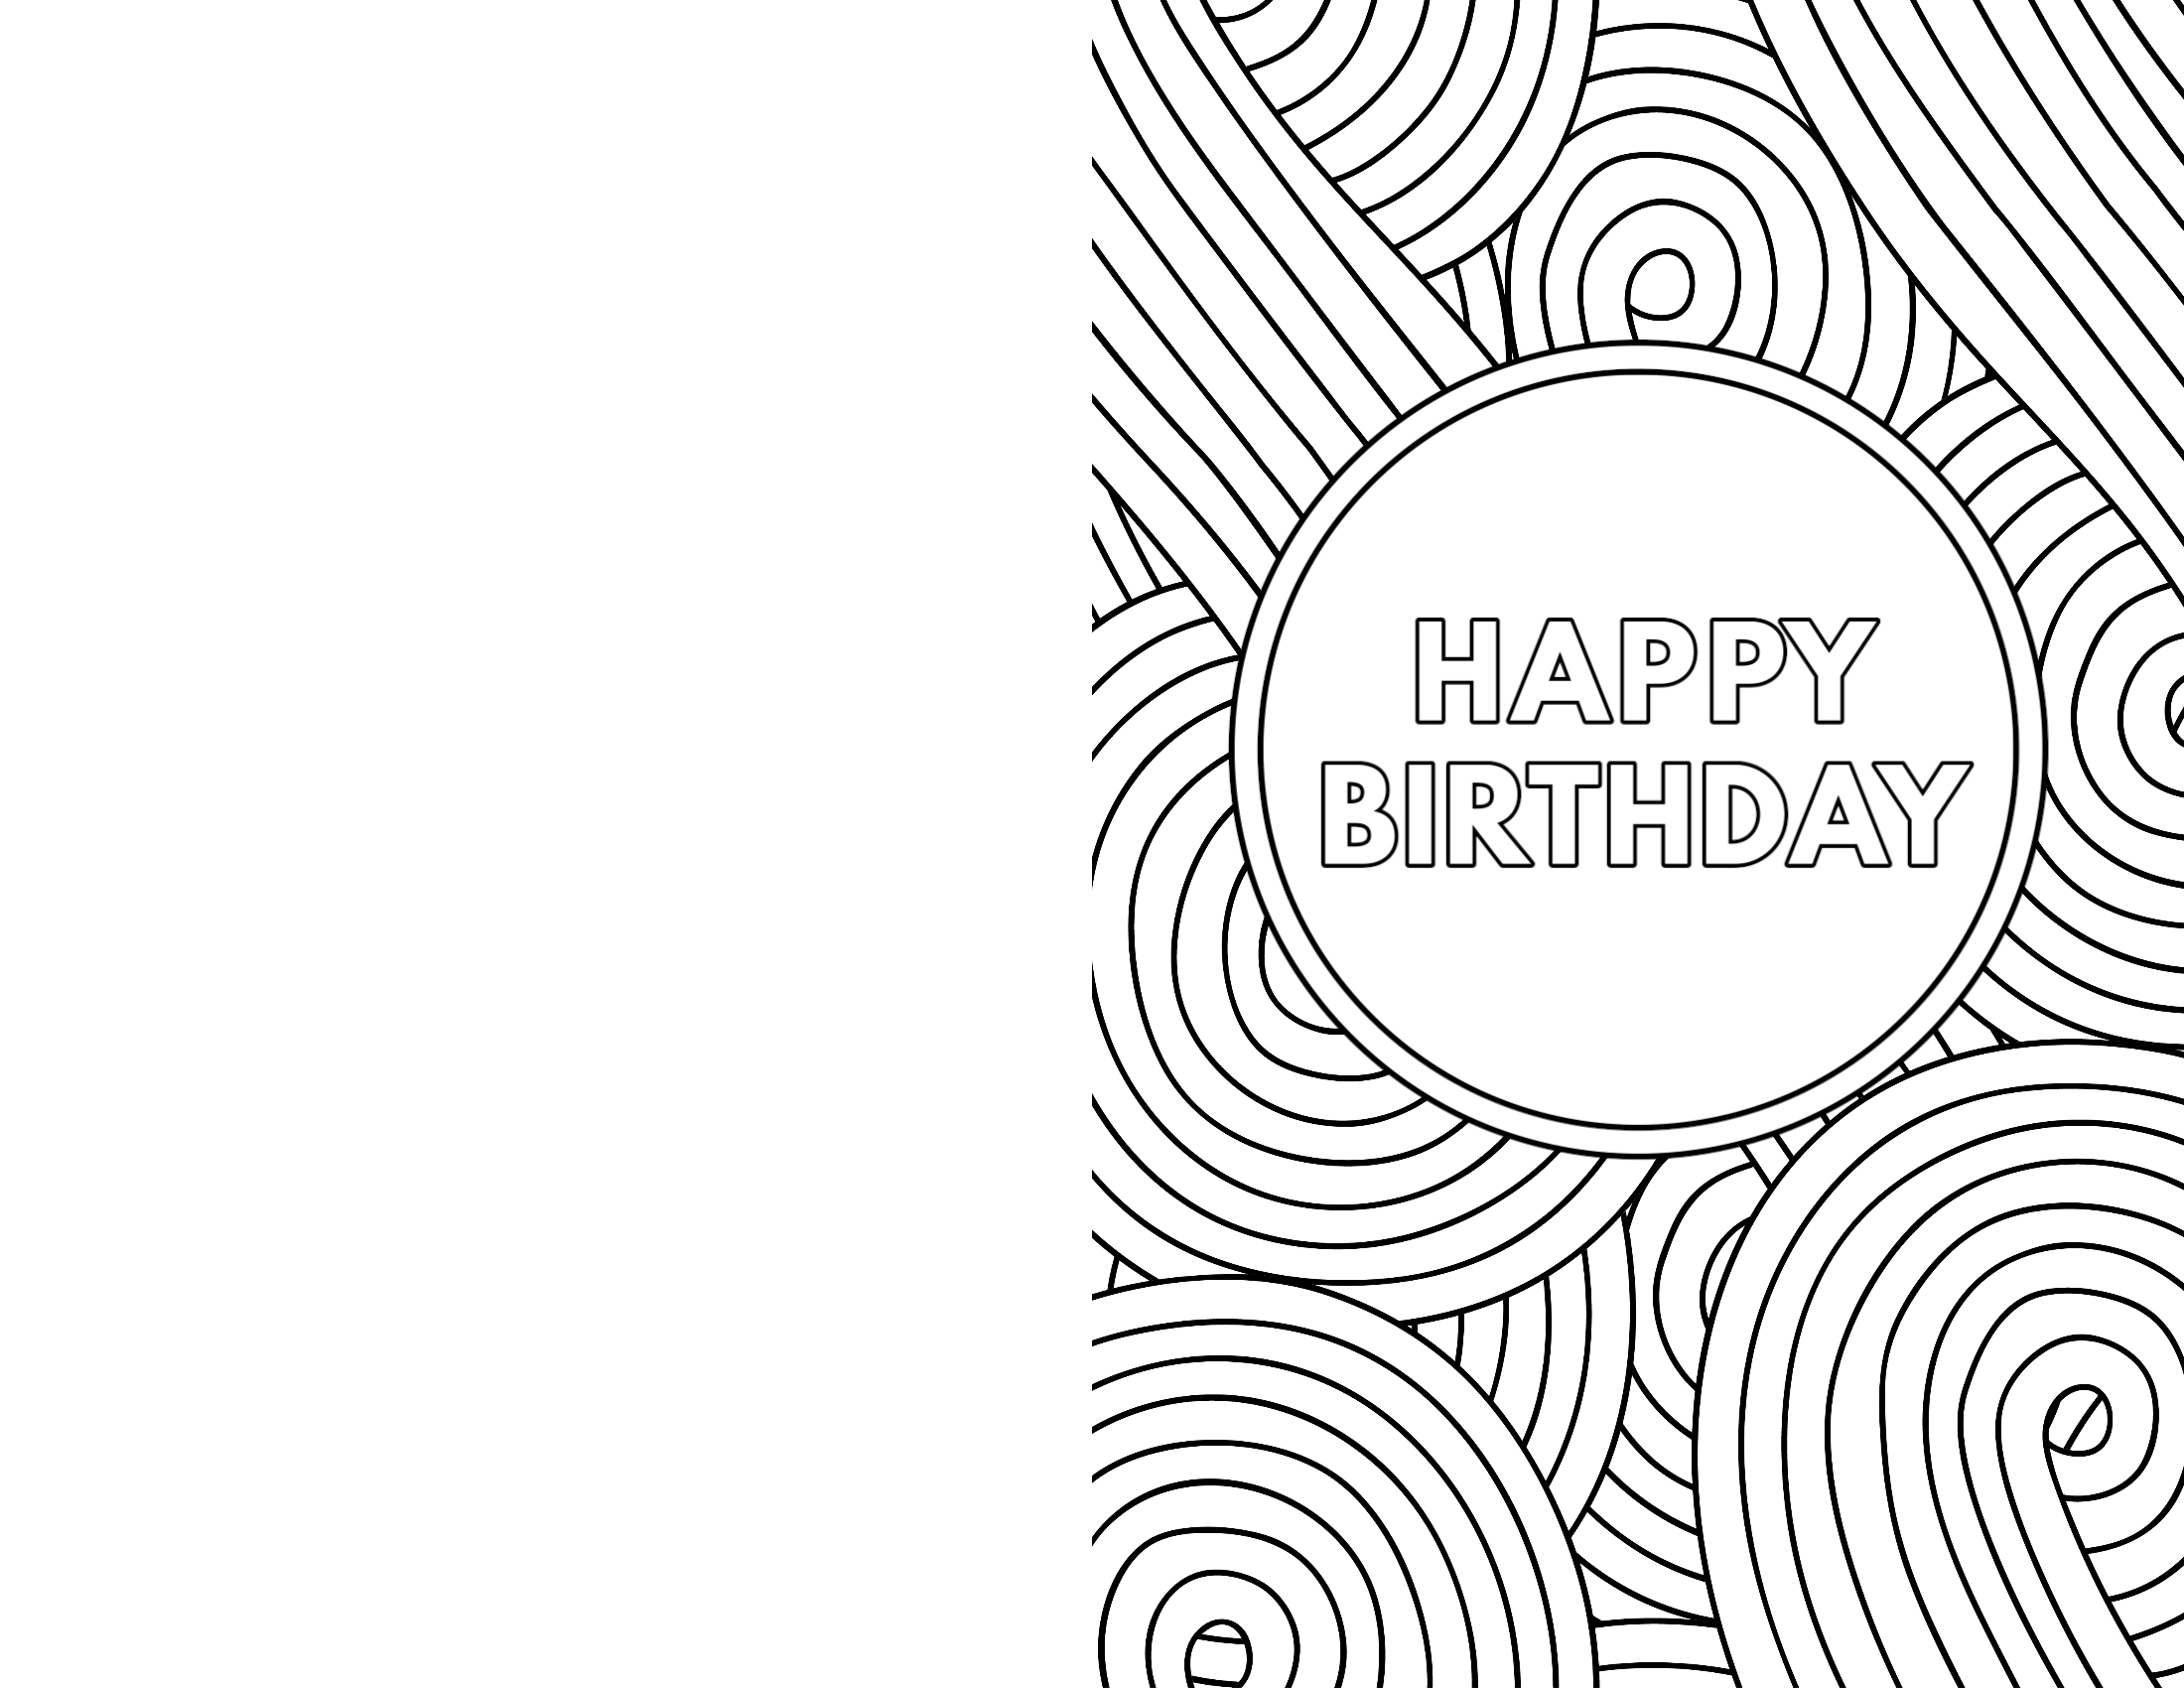 doodle-kreations-free-printable-birthday-card-view-10-create-a-free